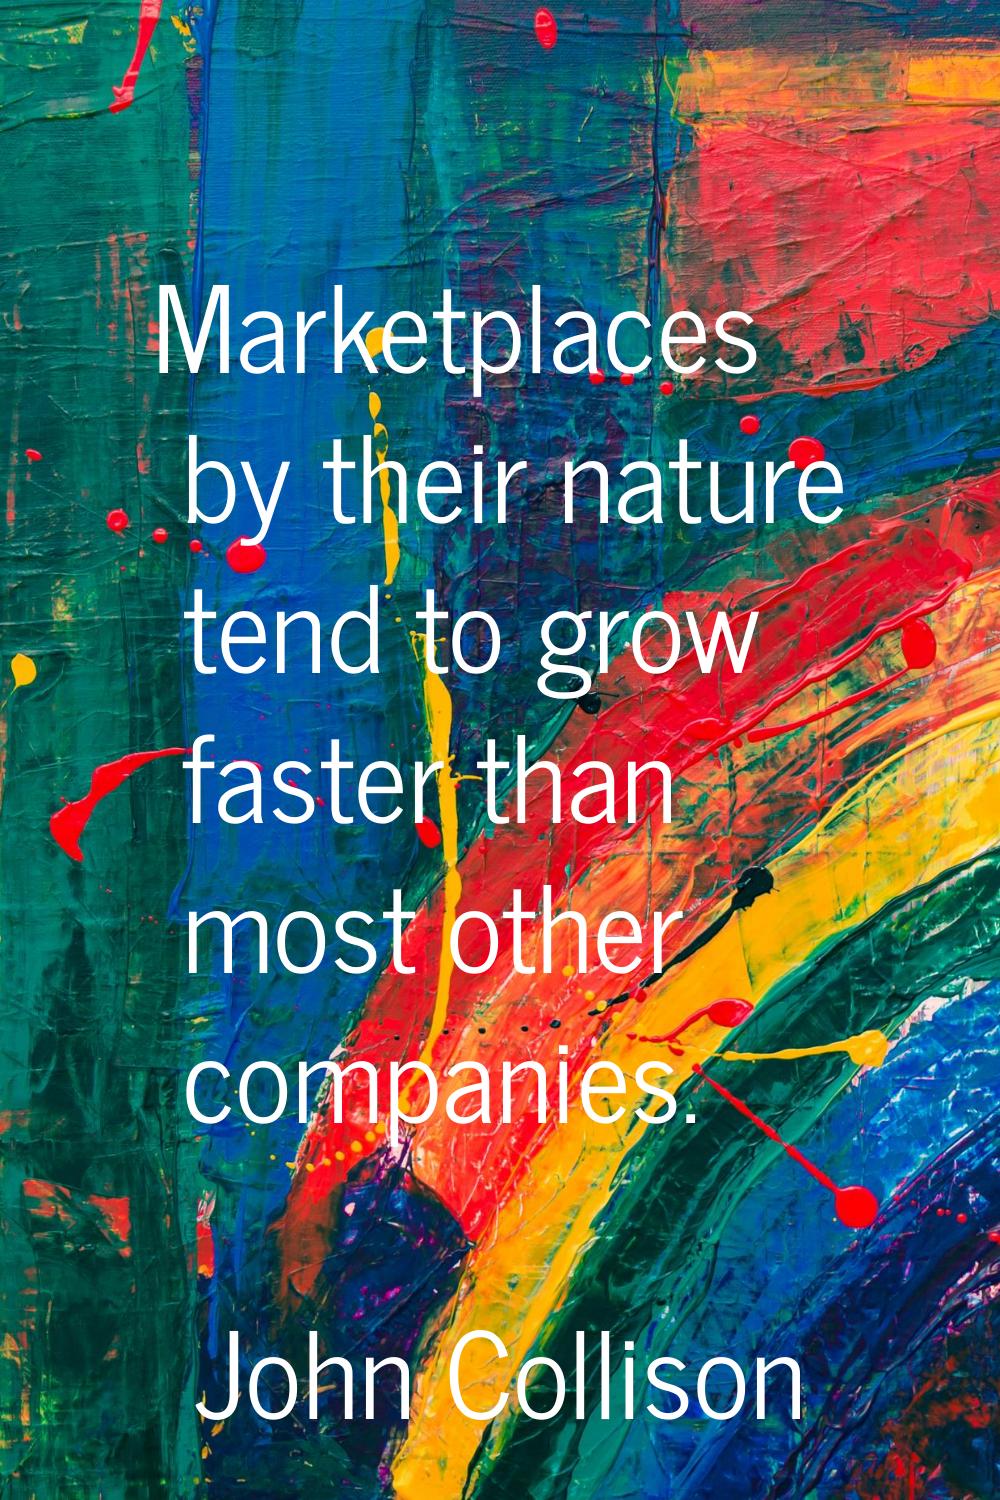 Marketplaces by their nature tend to grow faster than most other companies.